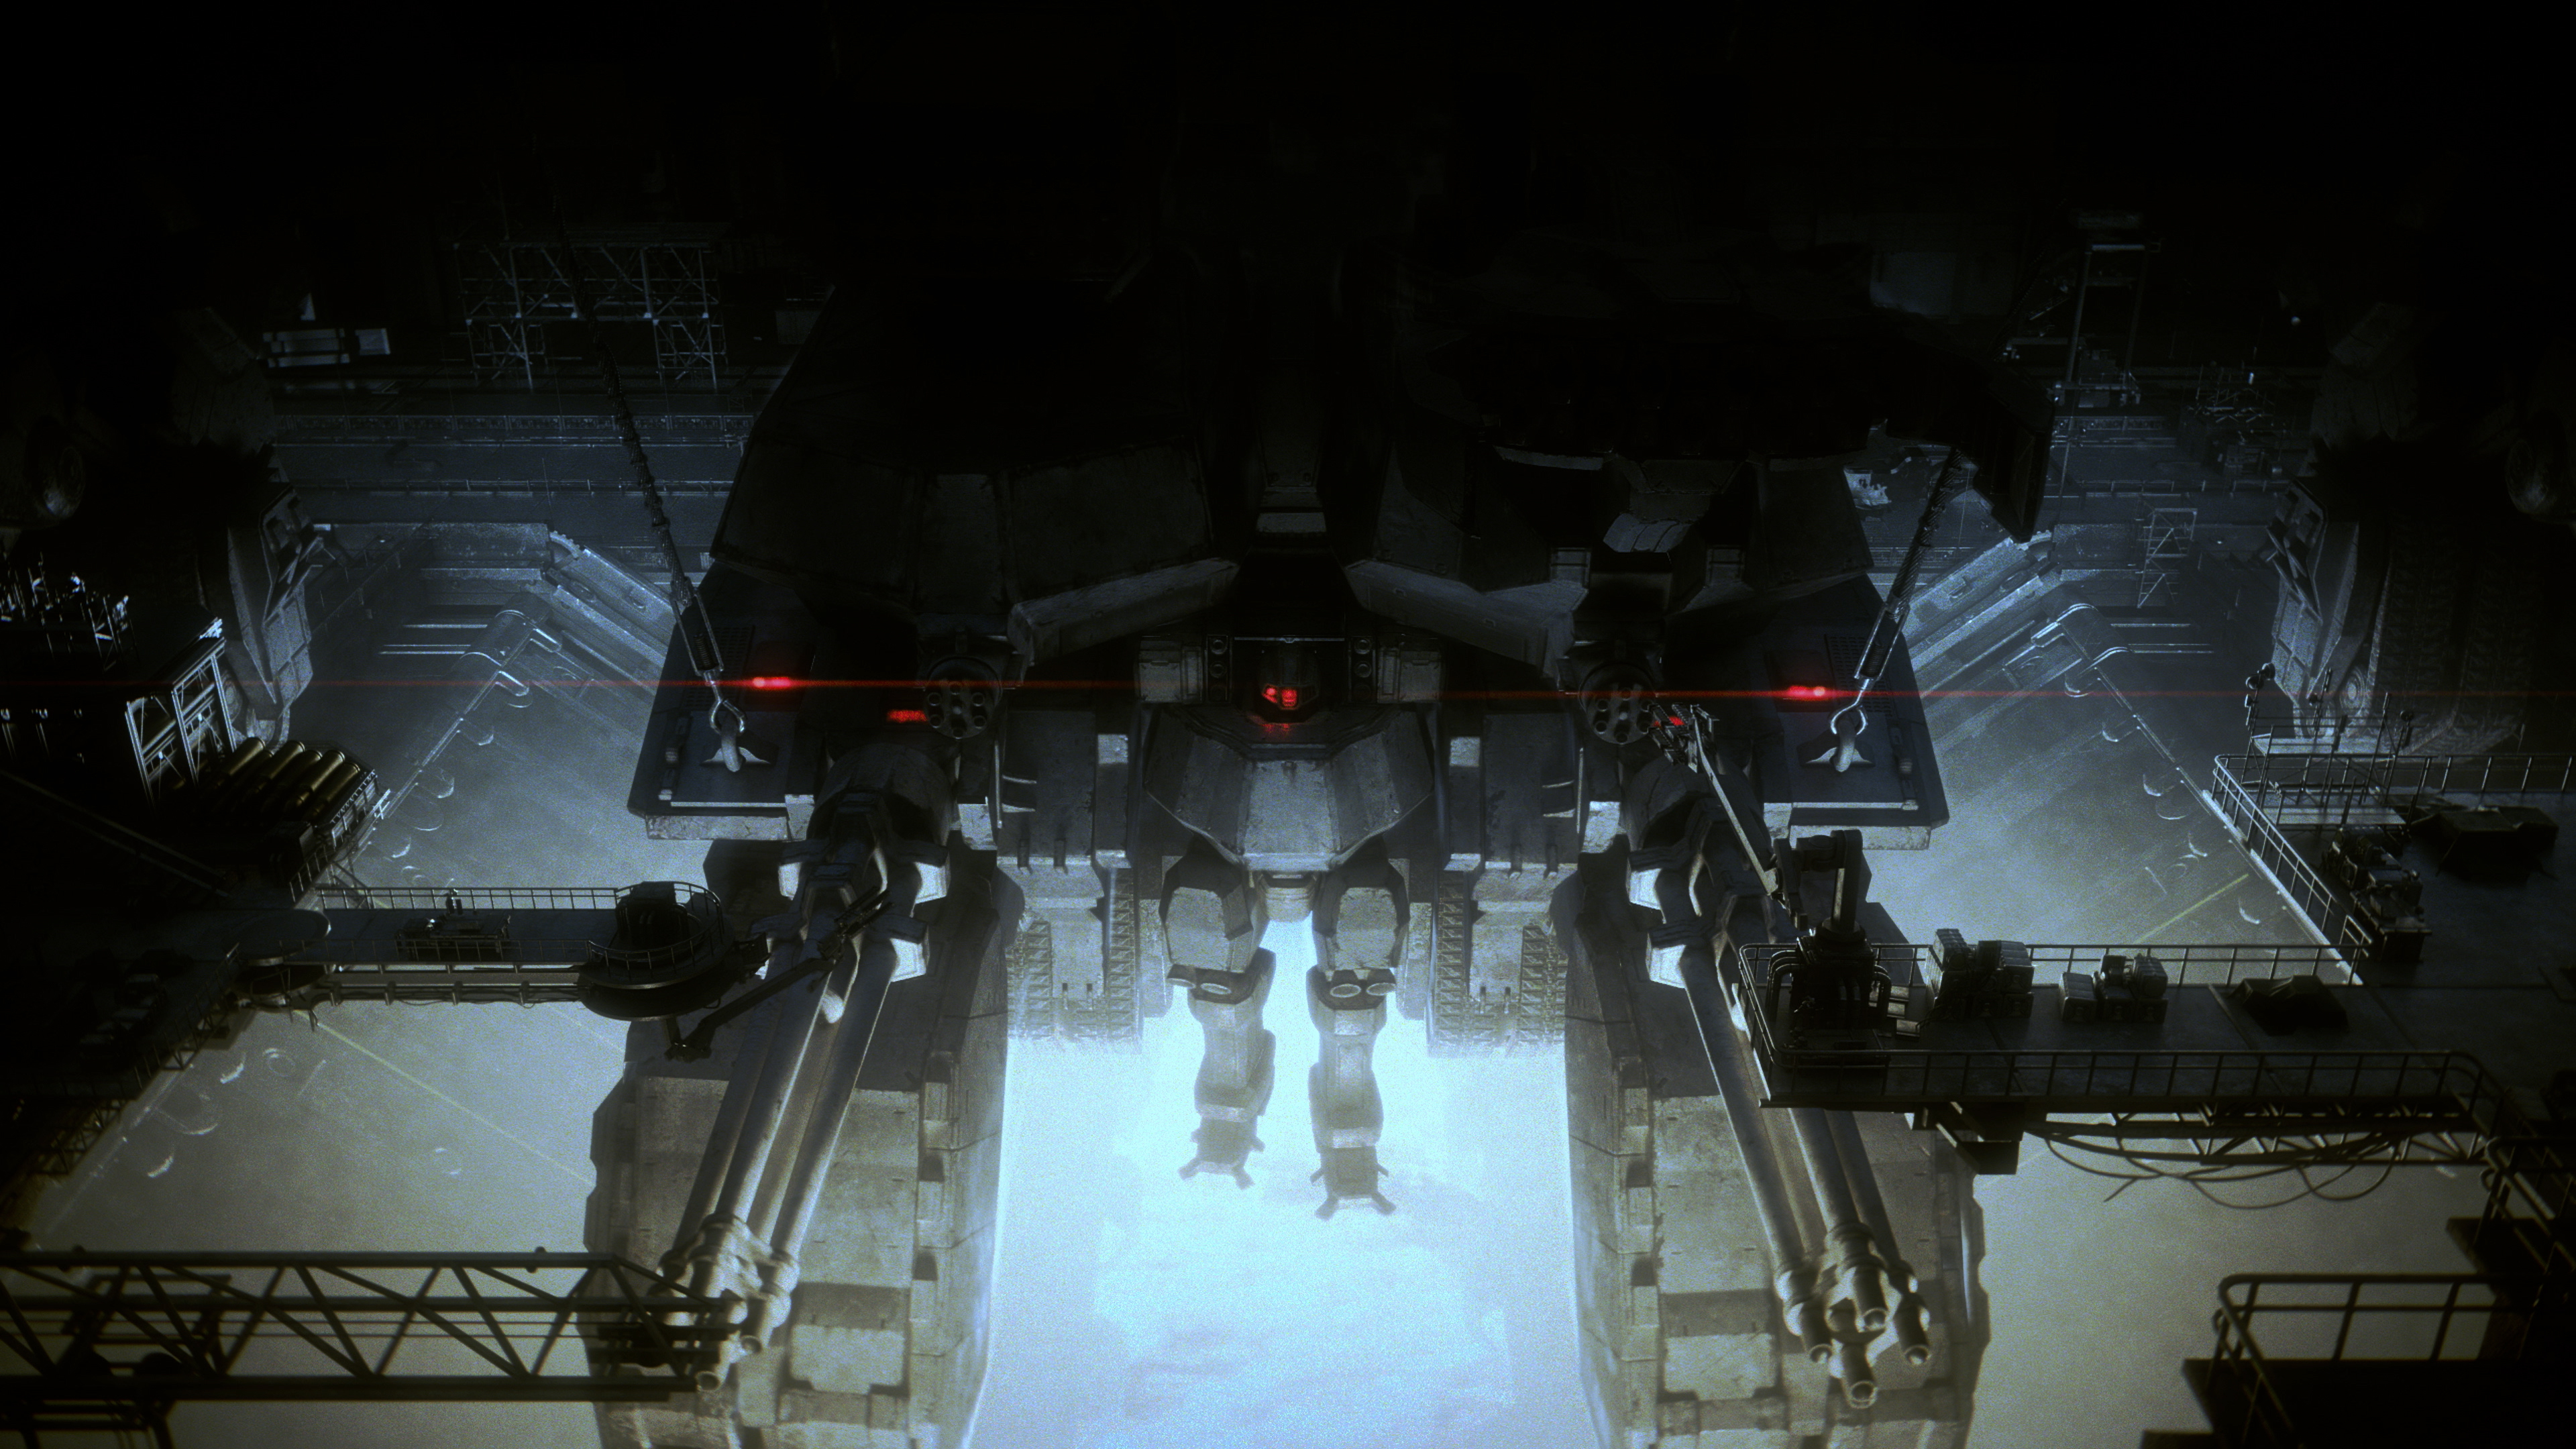 HD wallpaper featuring a mech from Armored Core VI: Fires of Rubicon, looming in a dark, futuristic hangar.